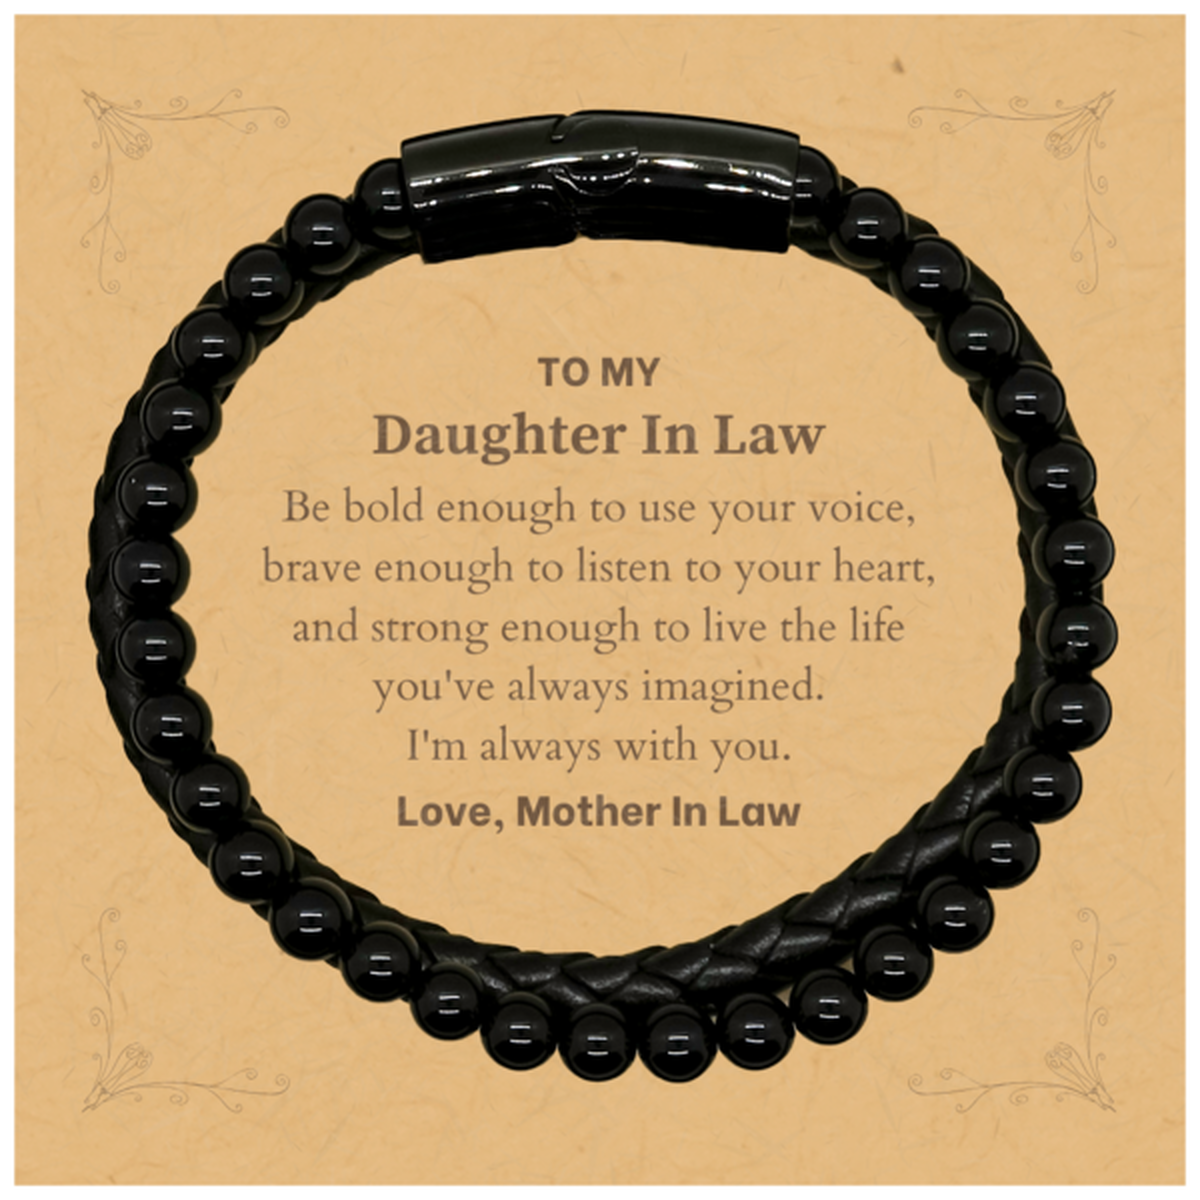 Keepsake Daughter In Law Stone Leather Bracelets Gift Idea Graduation Christmas Birthday Daughter In Law from Mother In Law, Daughter In Law Be bold enough to use your voice, brave enough to listen to your heart. Love, Mother In Law